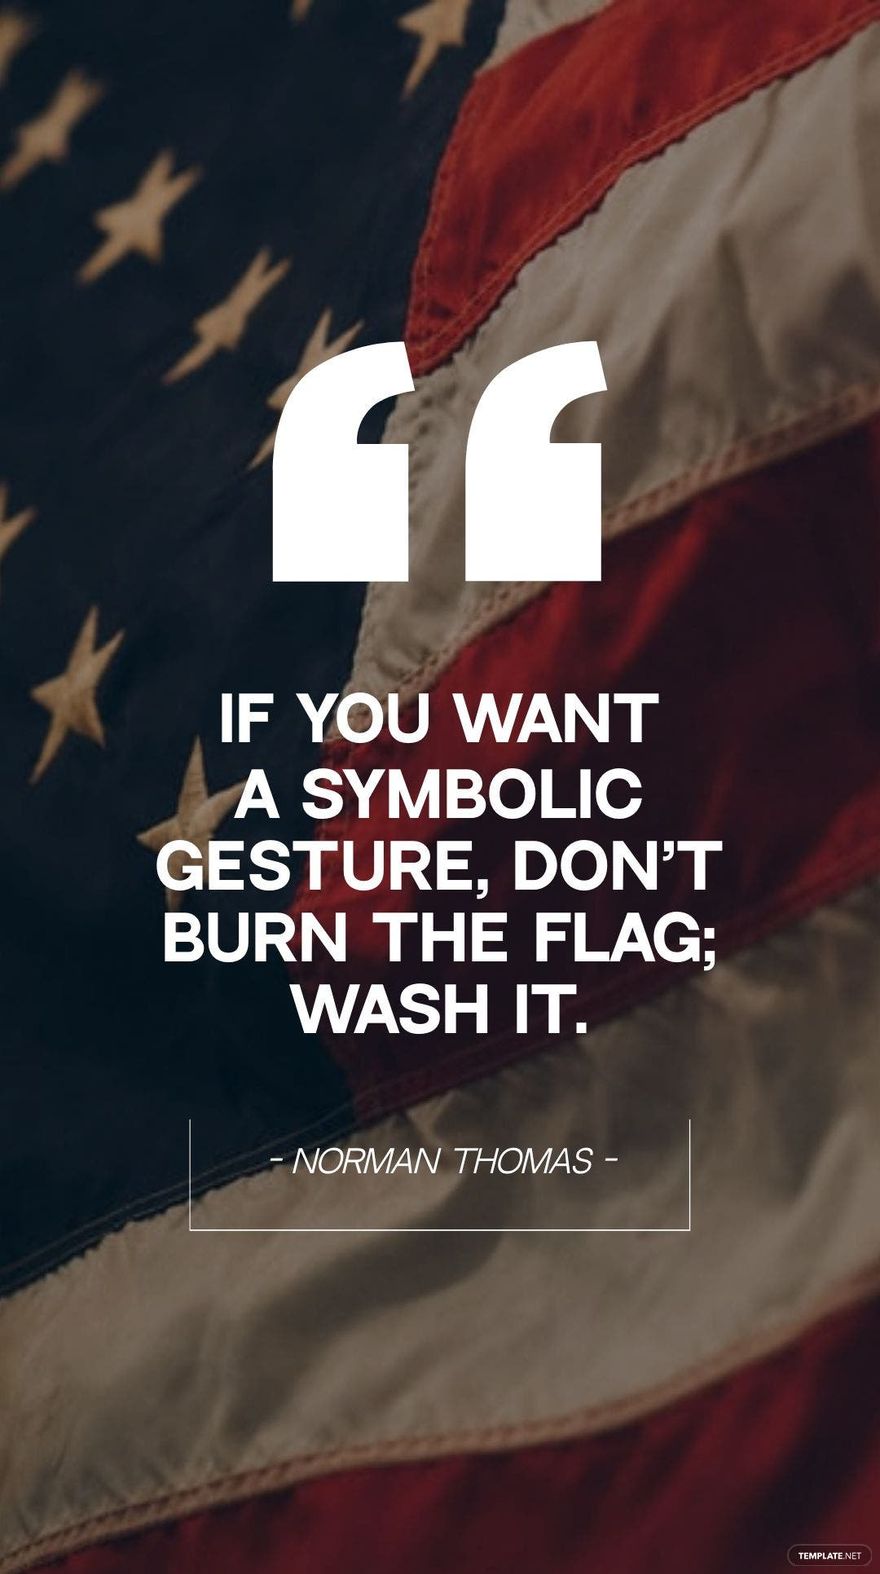 Free Norman Thomas - If you want a symbolic gesture, don’t burn the flag; wash it.